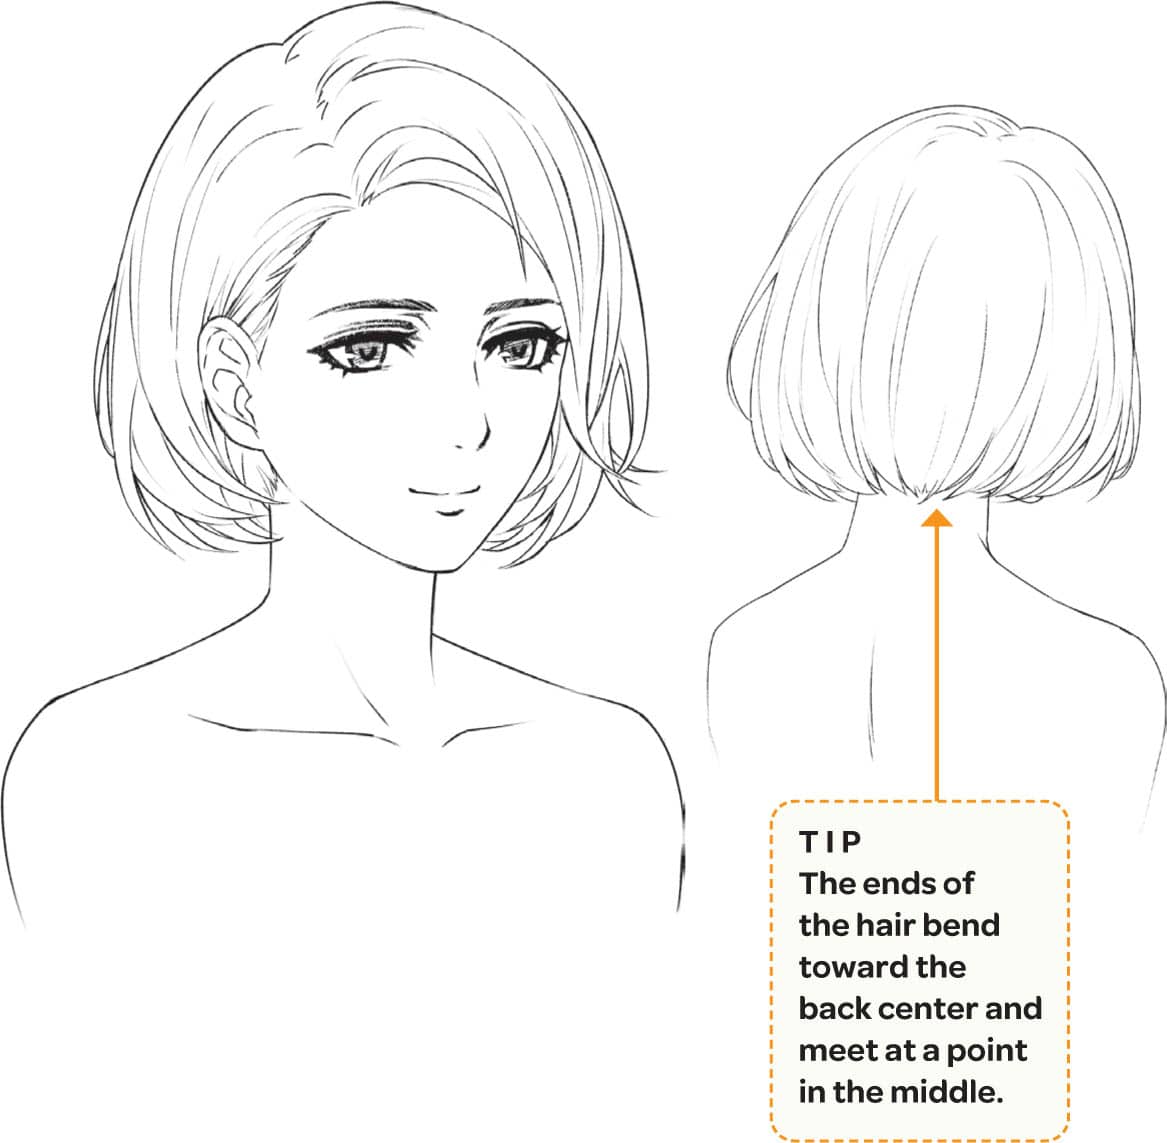 TIP The ends of the hair bend toward the back center and meet at a point in the middle.